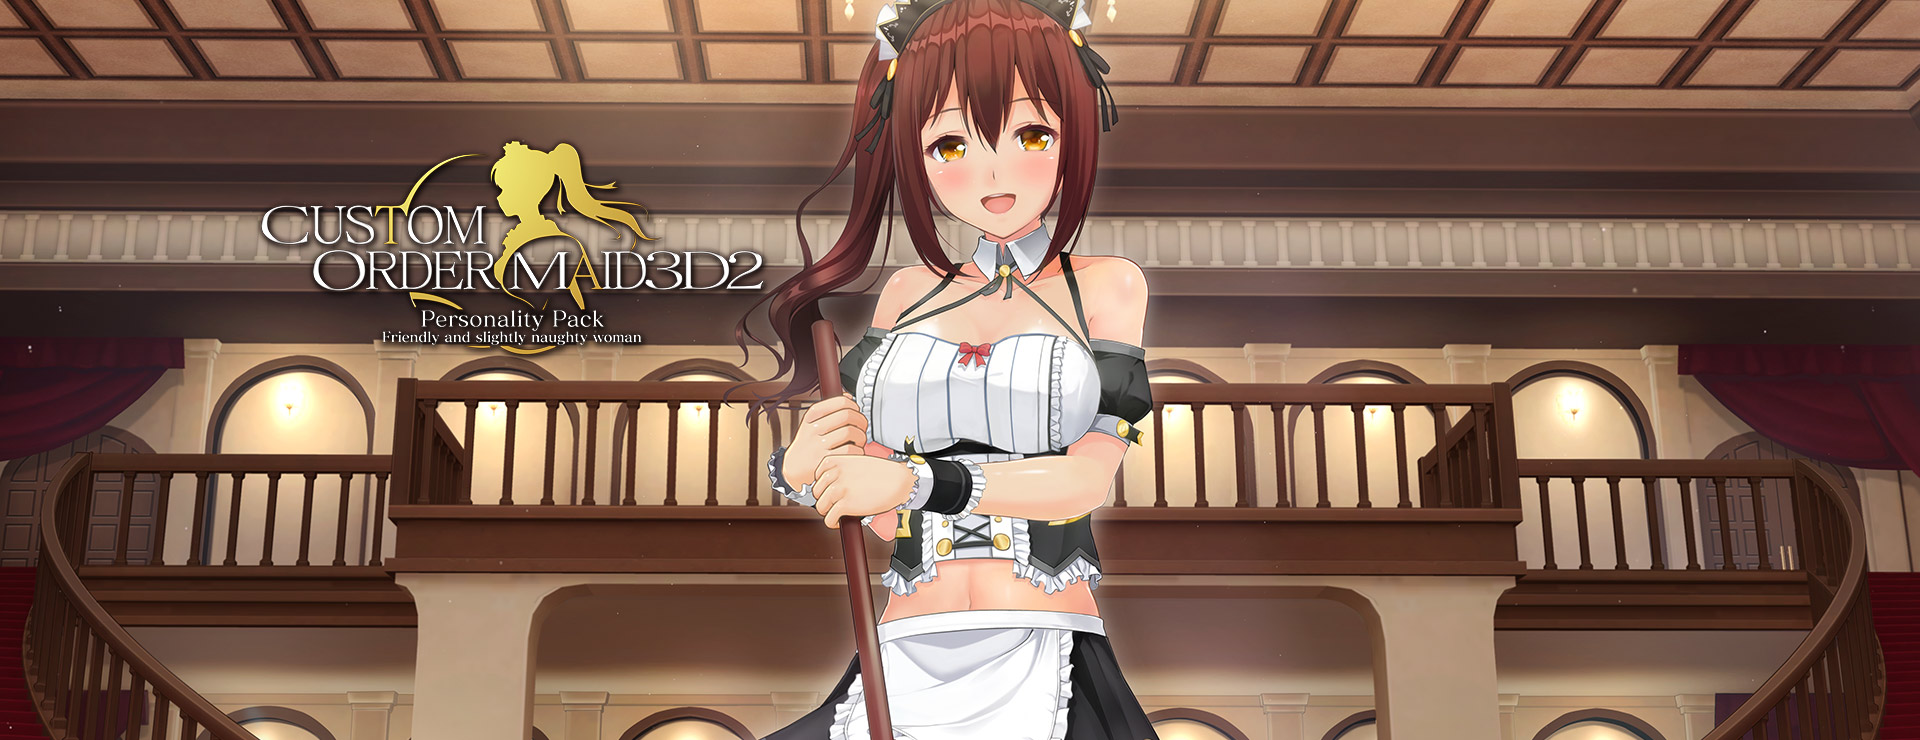 Custom Order Maid 3D2: Friendly and Slightly Naughty Woman DLX Edition - Simulation Game